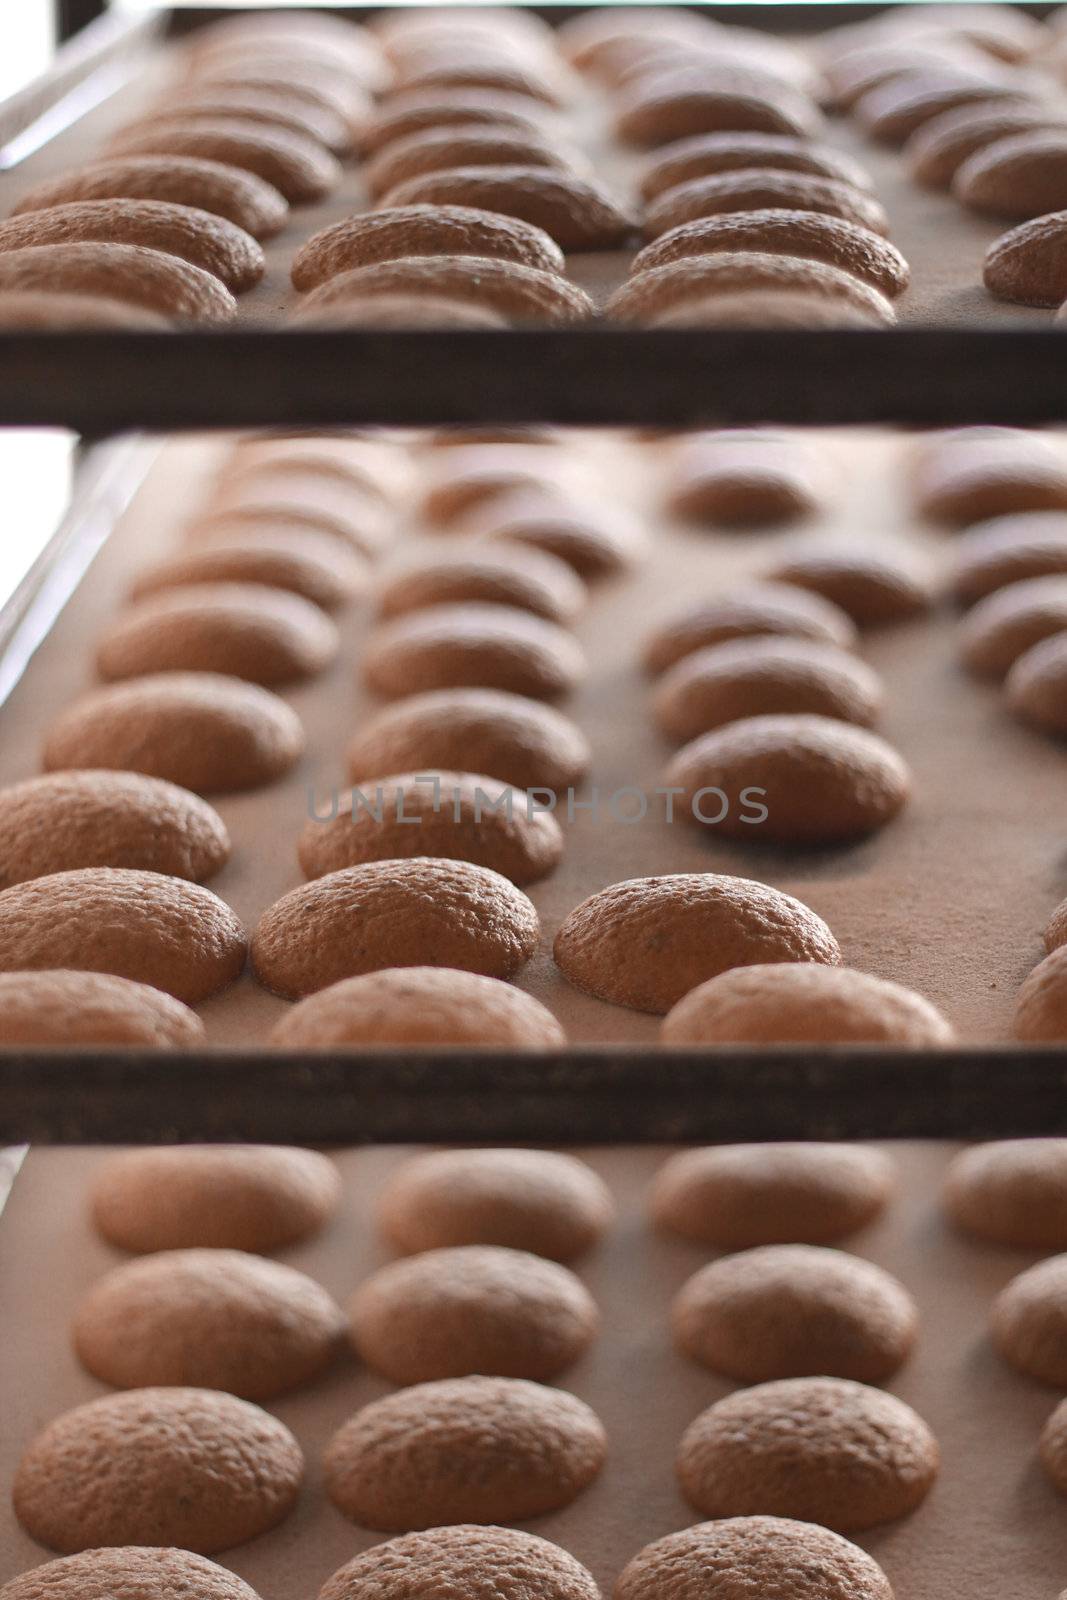 Cookies at the bakery by annems